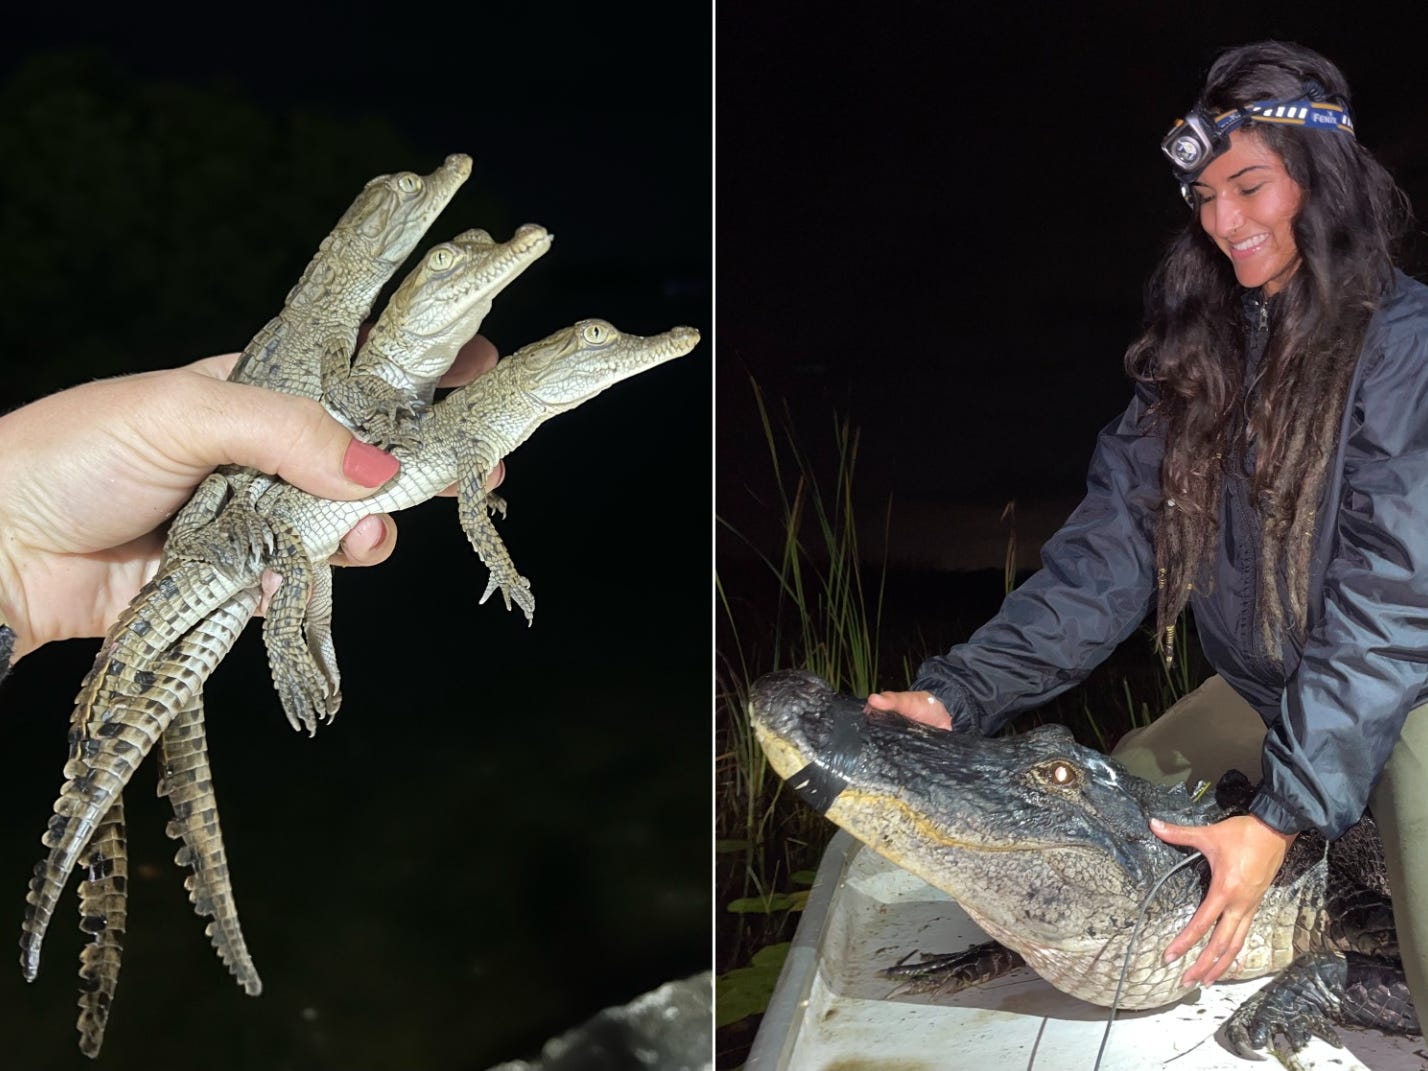 How do the Croc Docs, a team of Florida scientists who wrangle crocodiles and alligators, stay safe? ‘Very carefully.'